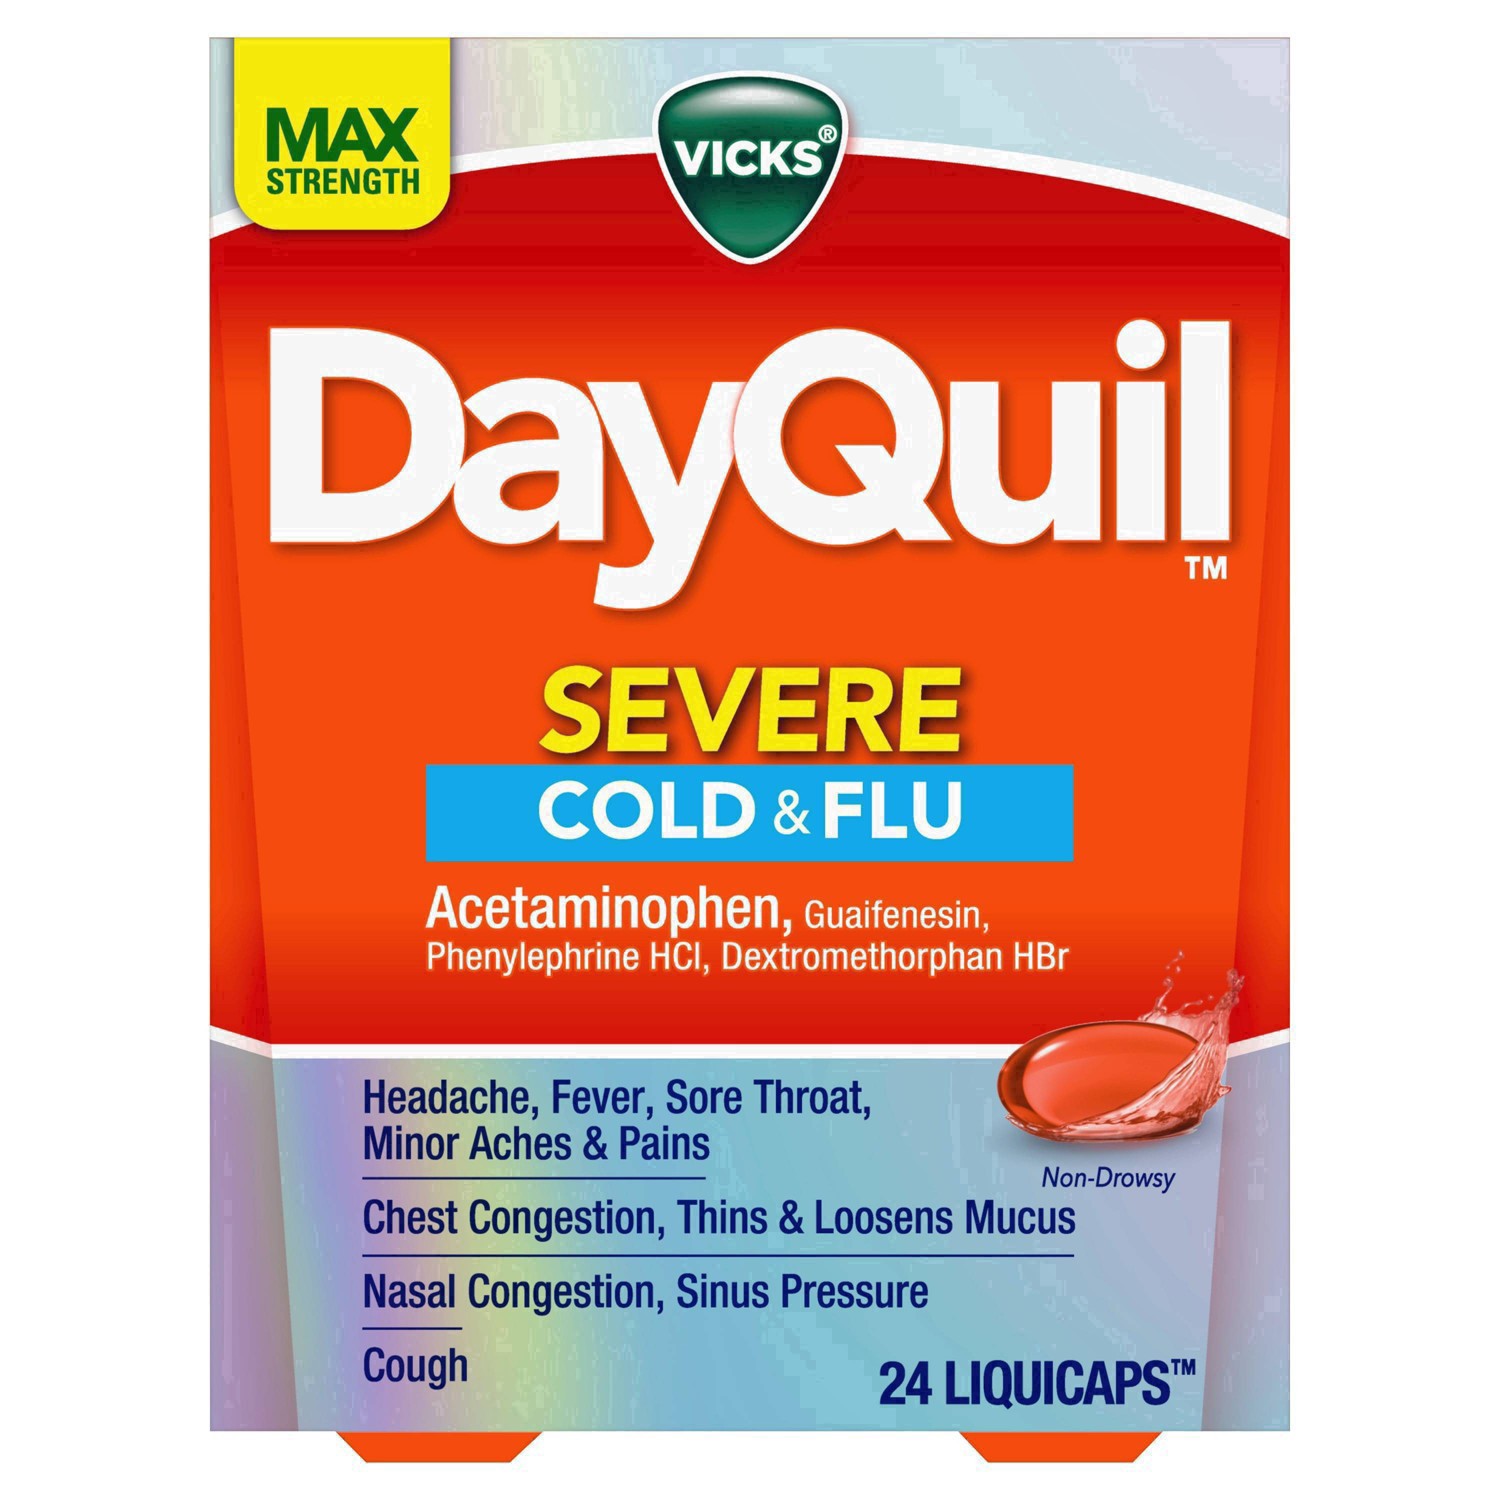 slide 23 of 46, Vicks DayQuil SEVERE Cold & Flu Medicine, Maximum Strength 9-Symptom Non-Drowsy Daytime Relief for Headache, Fever, Sore Throat, Minor Aches and Pains, Chest Congestion, Stuffy Nose, Nasal Congestion, Sinus Pressure, and Cough, 24 Liquicaps, 24 ct